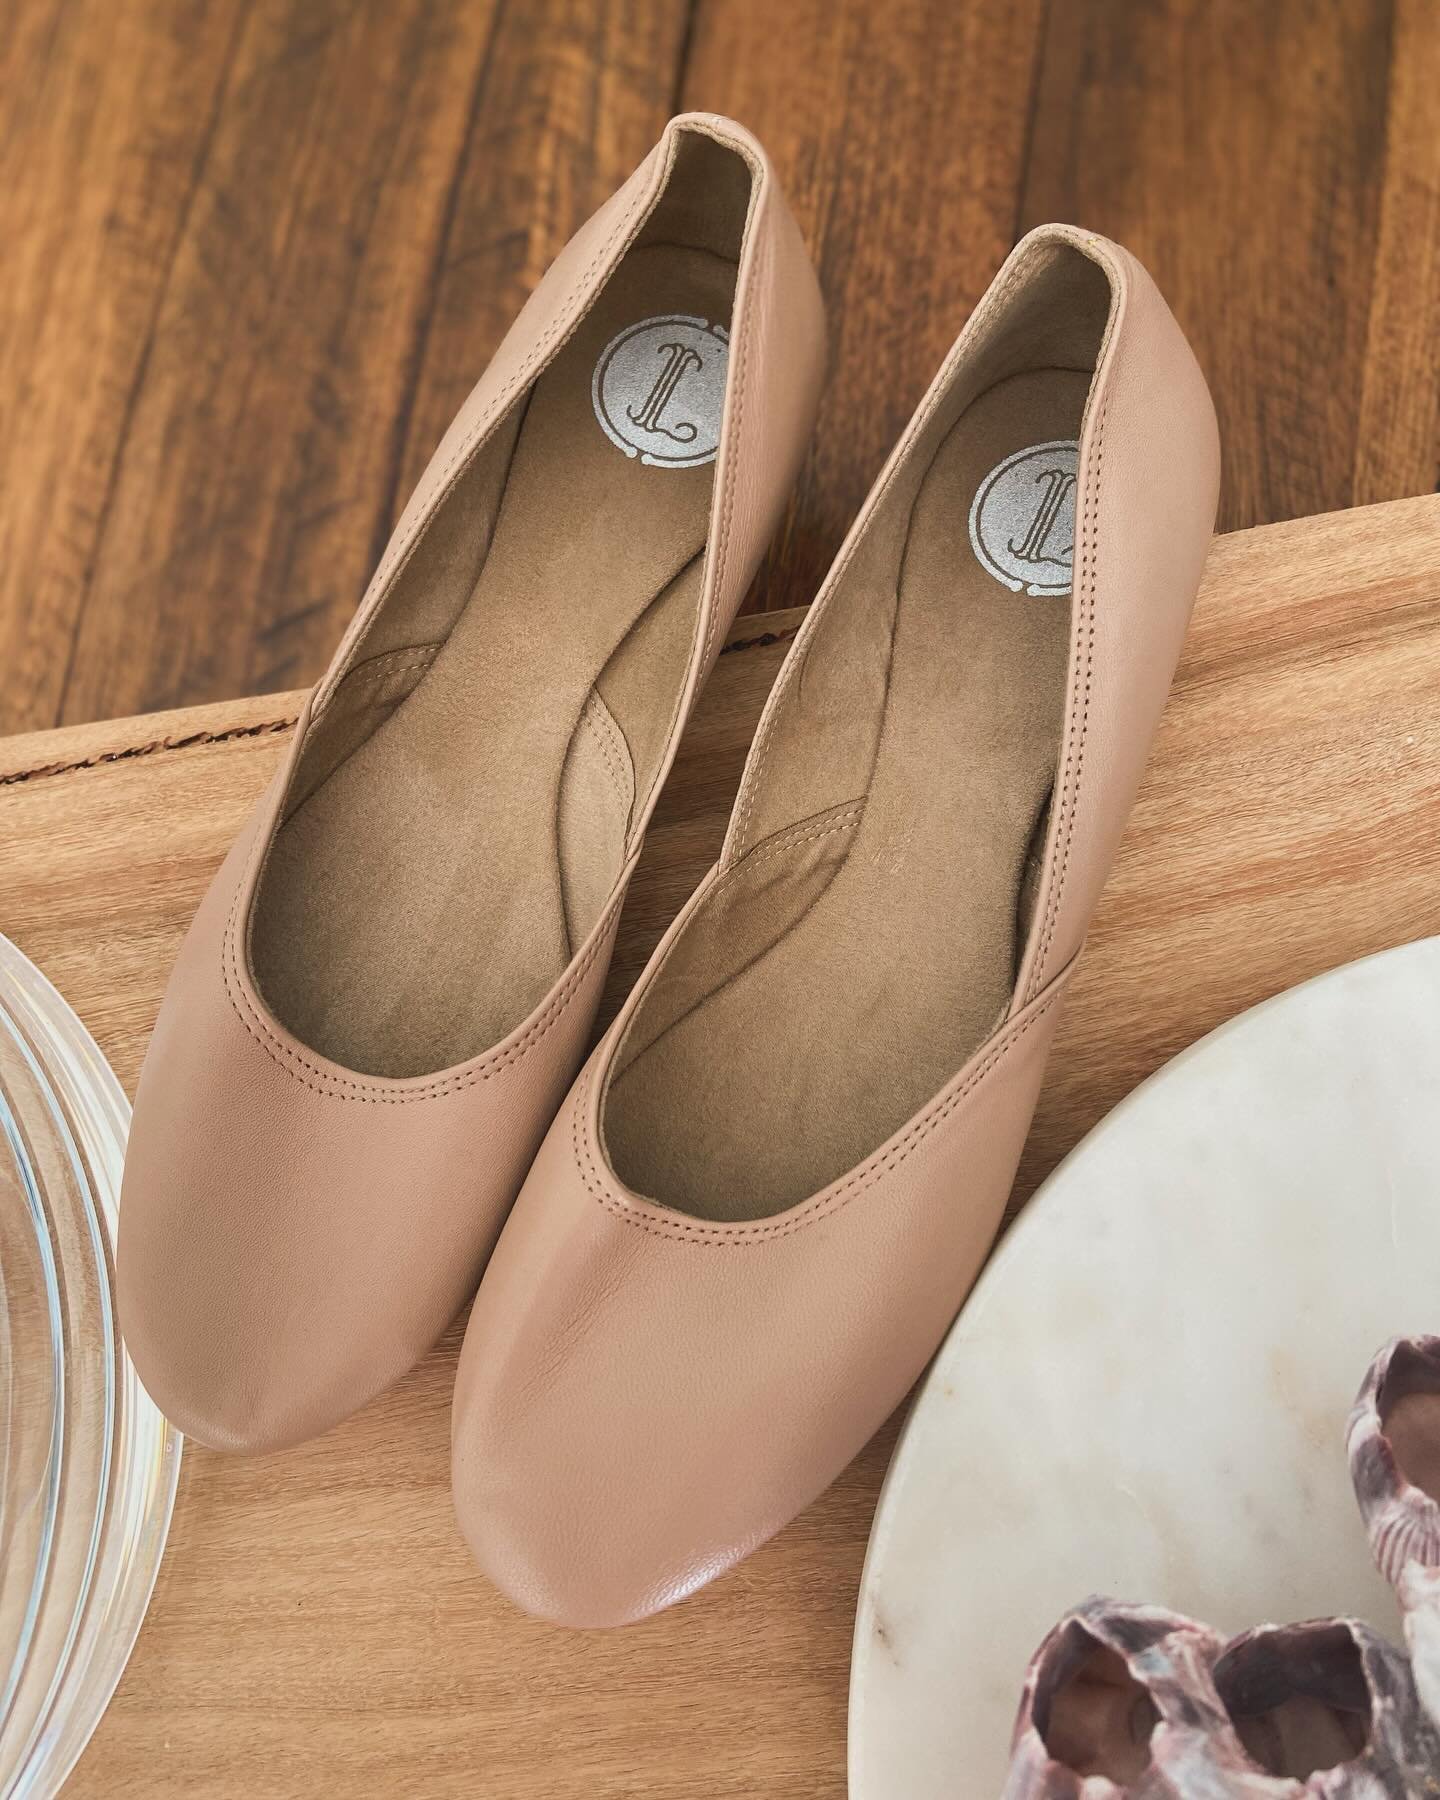 Our Maya Latte leather flats. These beauties literally walk out the door! 😁